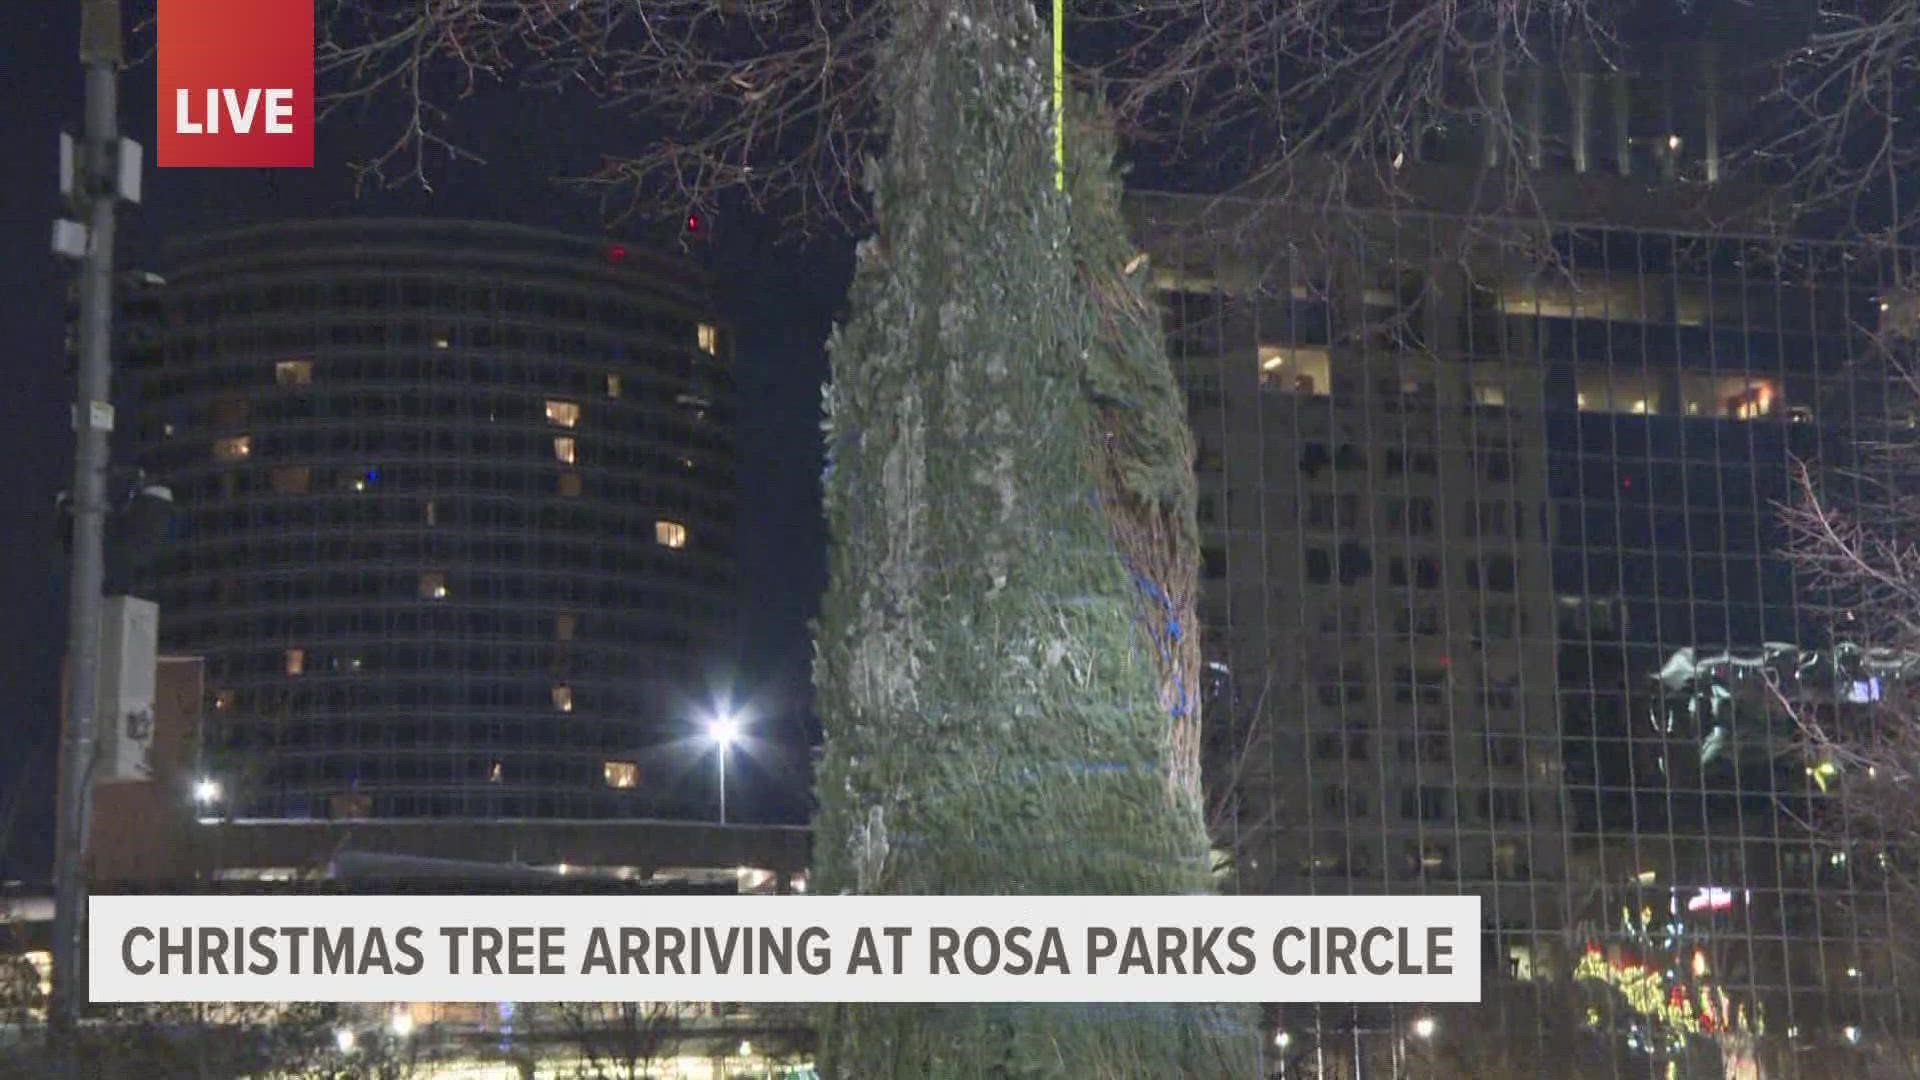 In another sign of the coming holiday season, the City of Grand Rapids is installing its annual Christmas tree this morning at Rosa Parks circle.